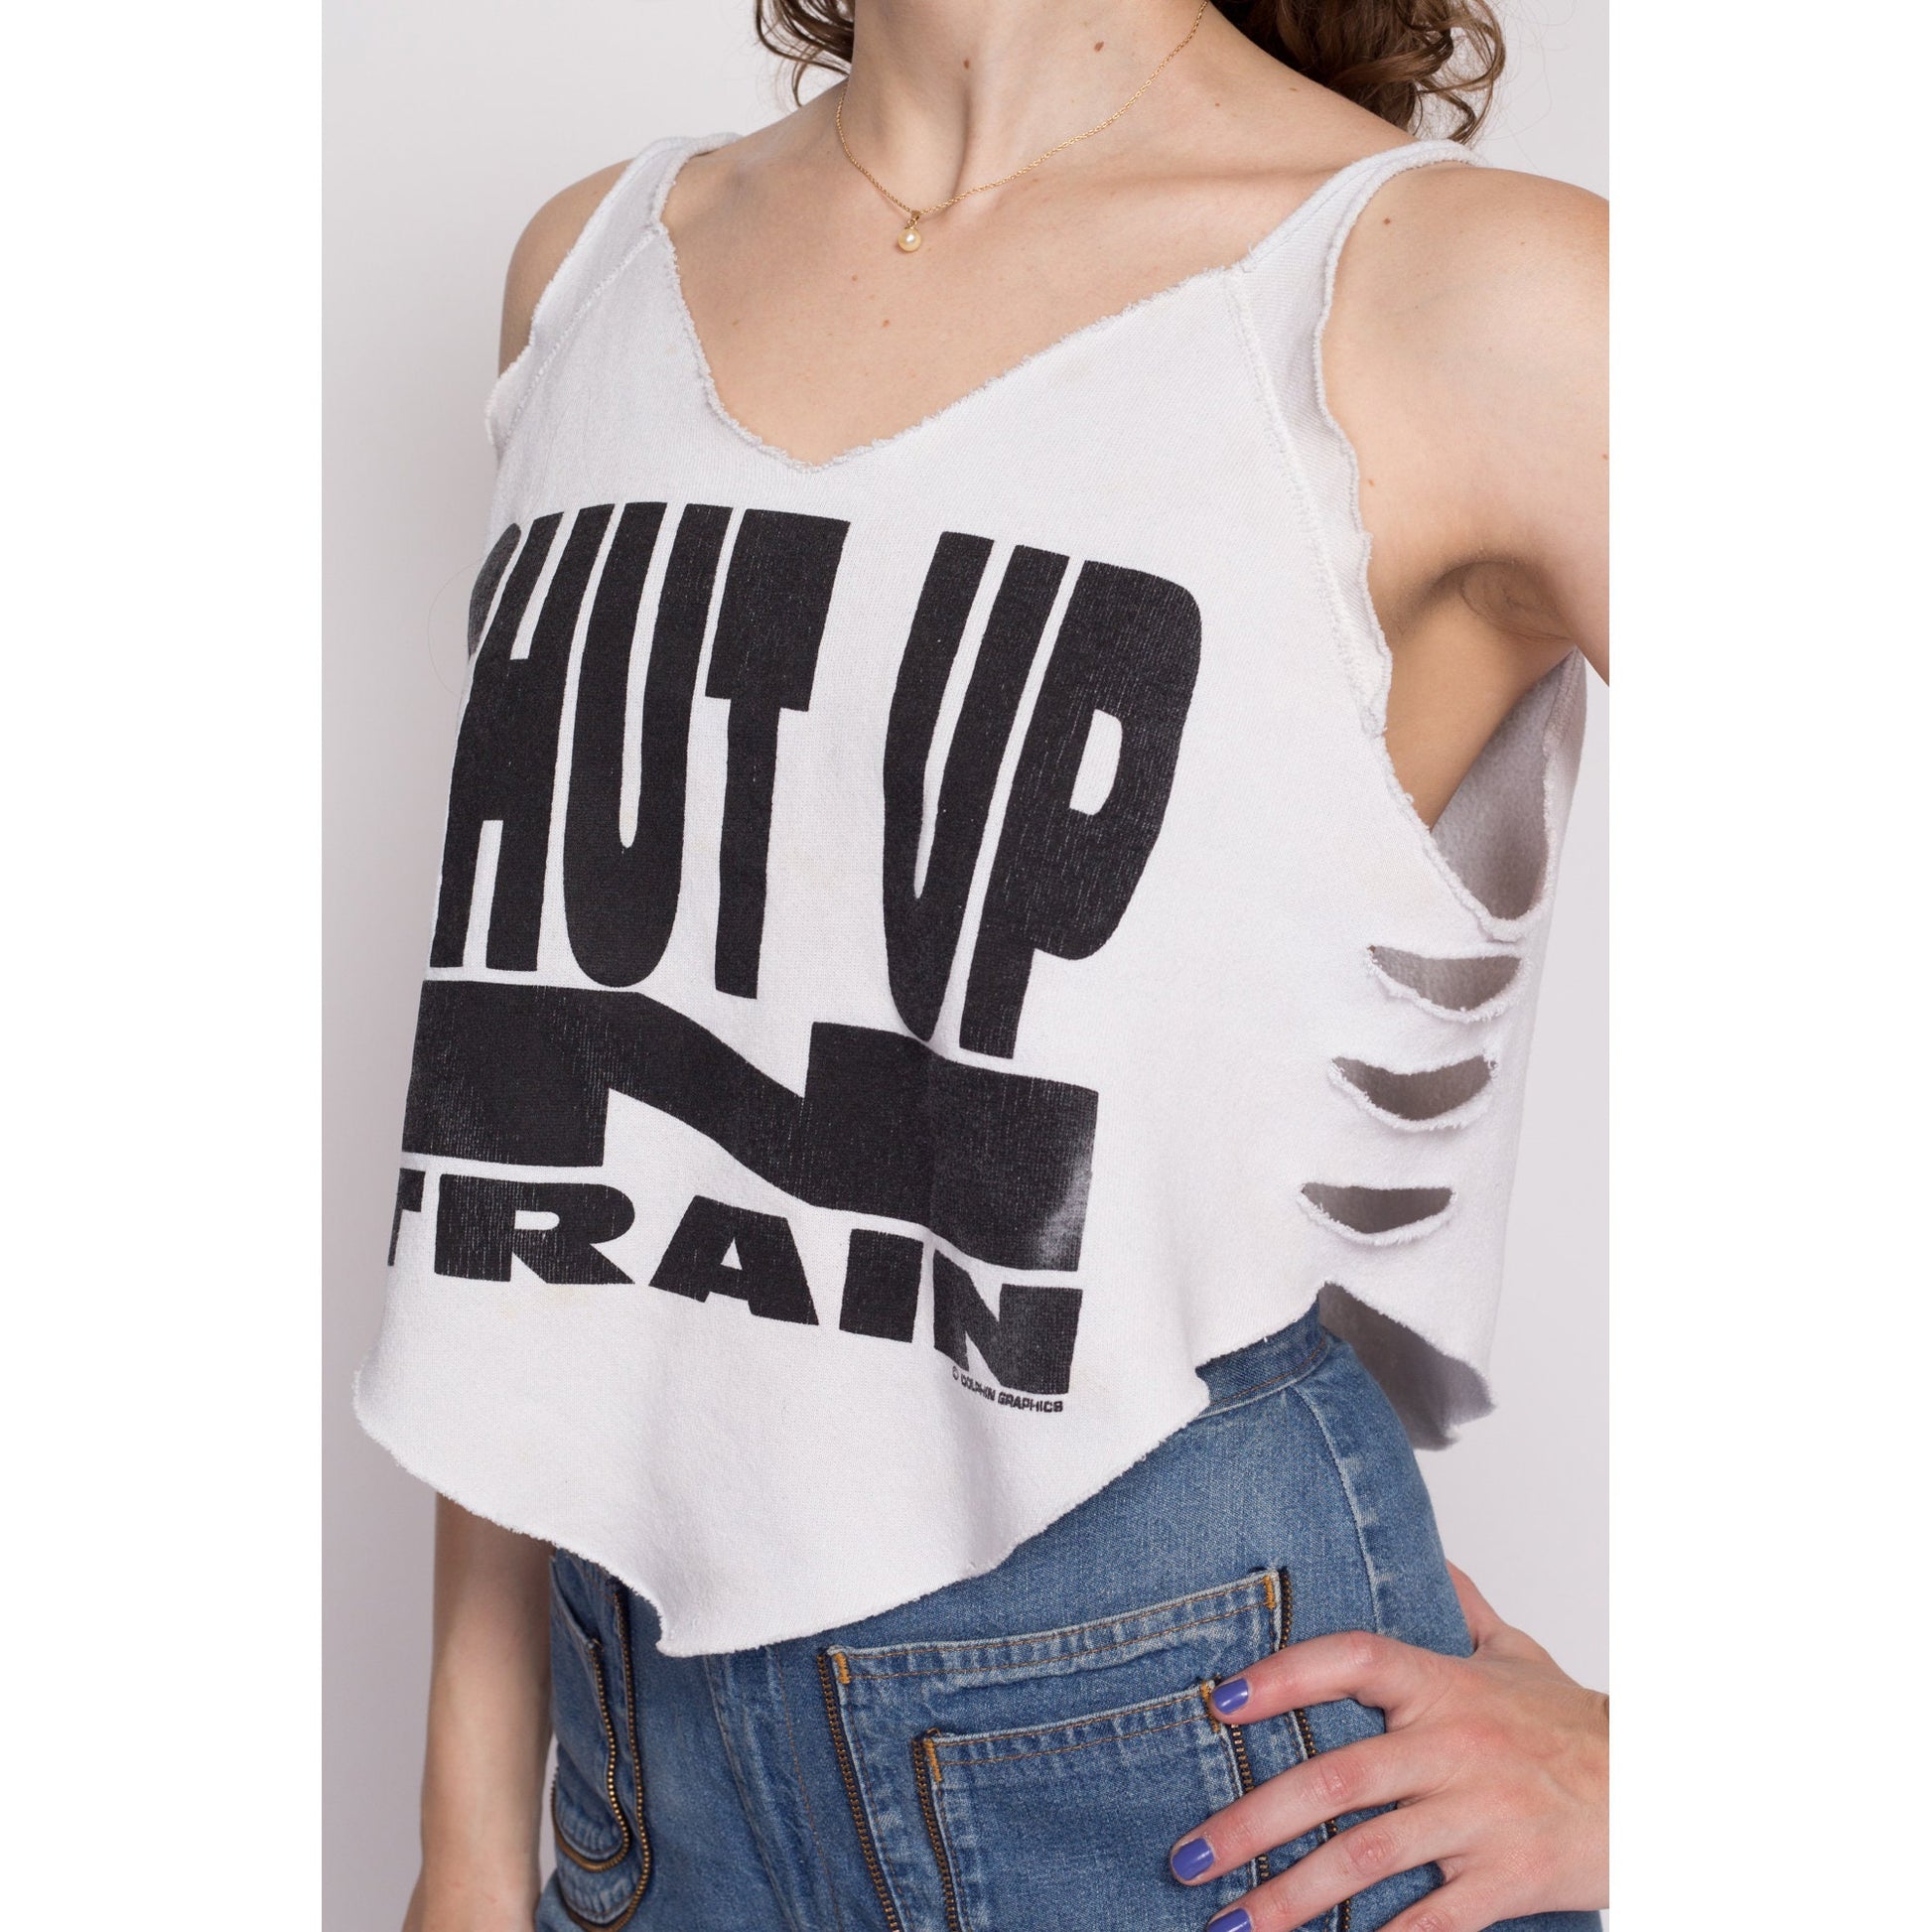 L| 80s "Shut Up N Train" Cropped Workout Tank - Large | Vintage Cut Off Reworked Sweatshirt Cut Out Crop Top